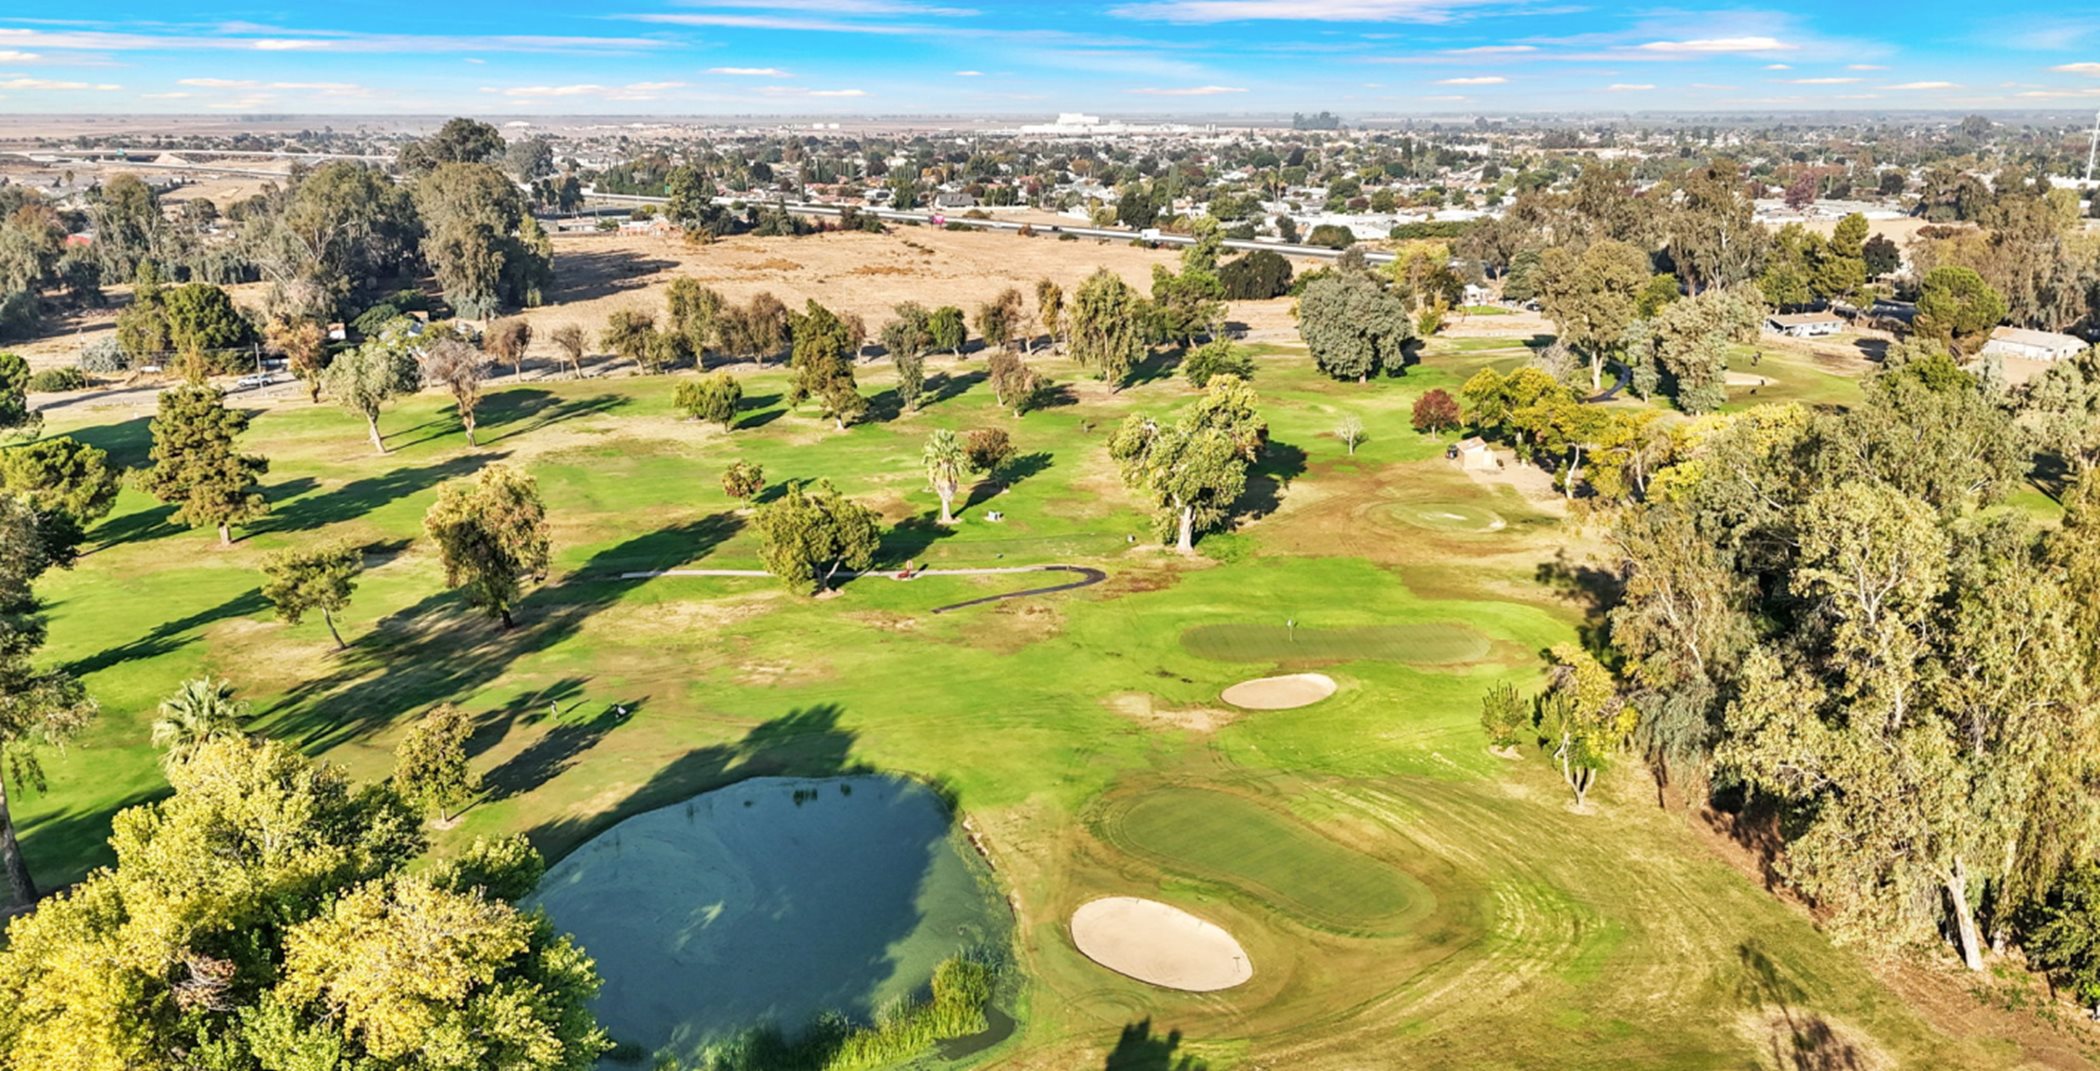 Leemore Golf Course aerial view